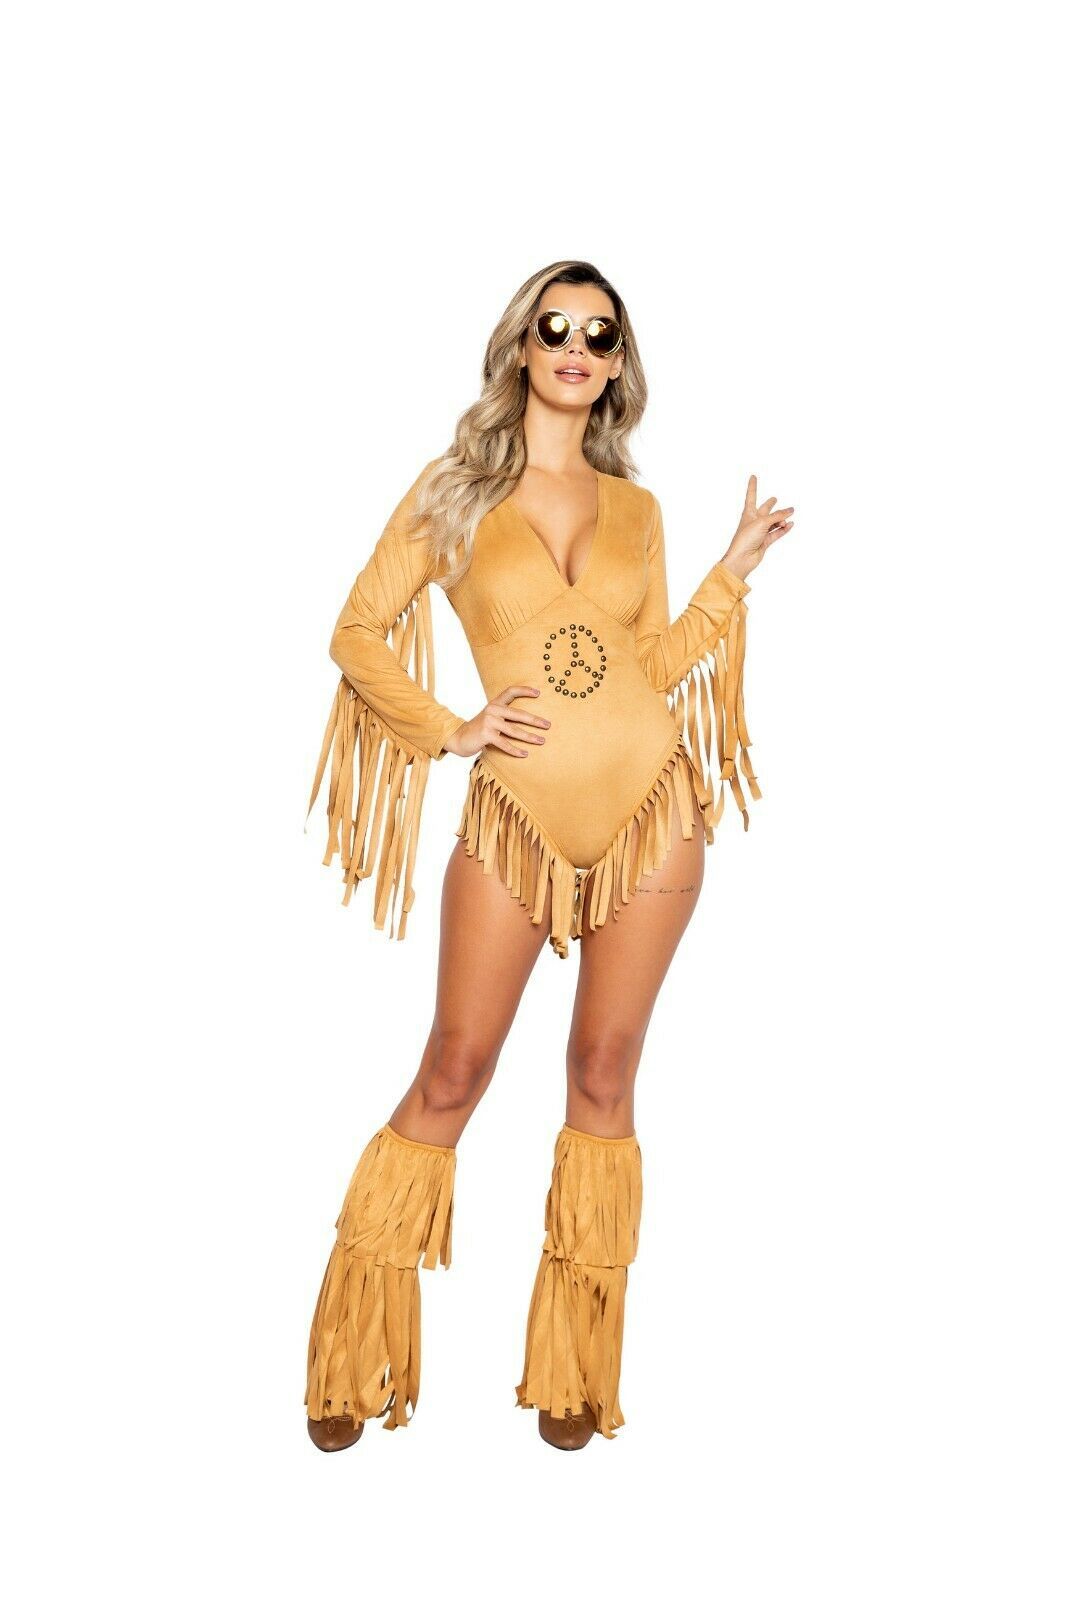 Roma Peace Lover Hippie Beige LS Bodysuit with Fringe Detail Costume 4998 - $64.99